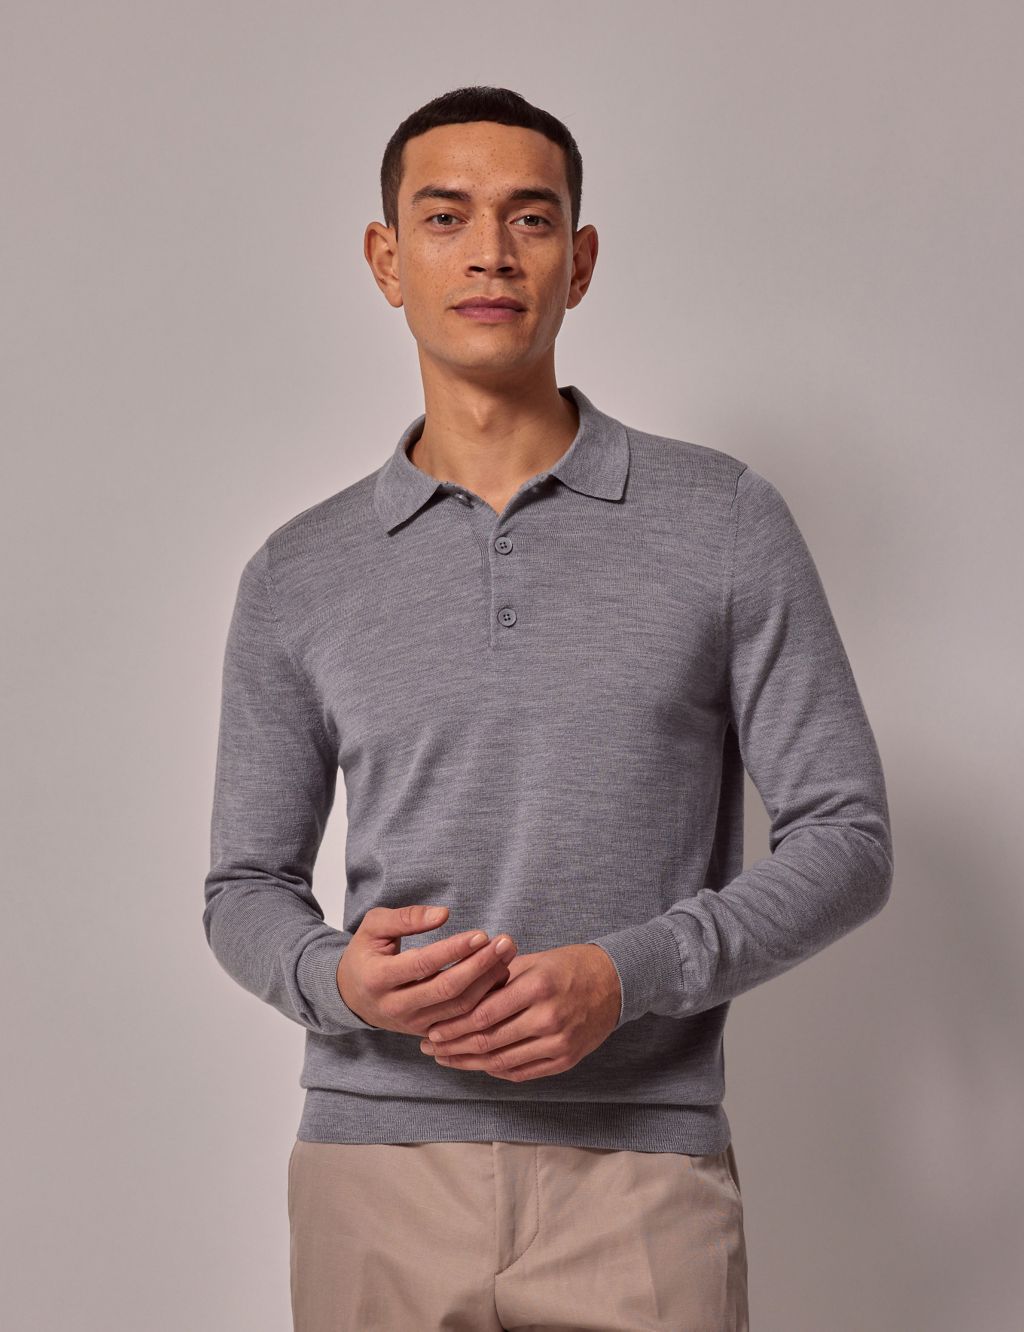 Pure Extra Fine Merino Wool Knitted Polo Shirt